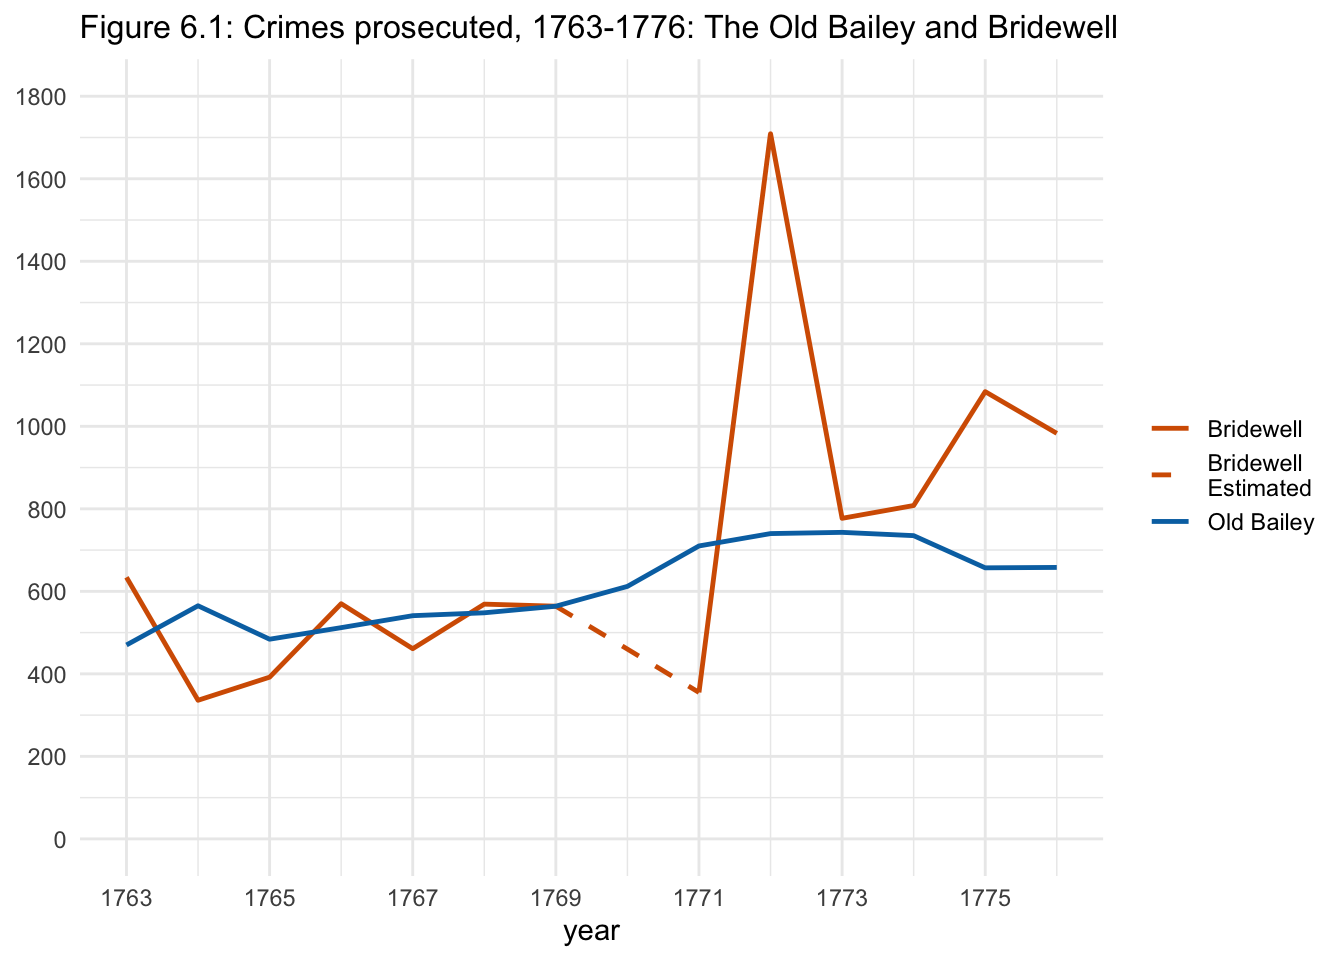 Figure 6.1: Crimes prosecuted, 1763-1776: The Old Bailey and Bridewell